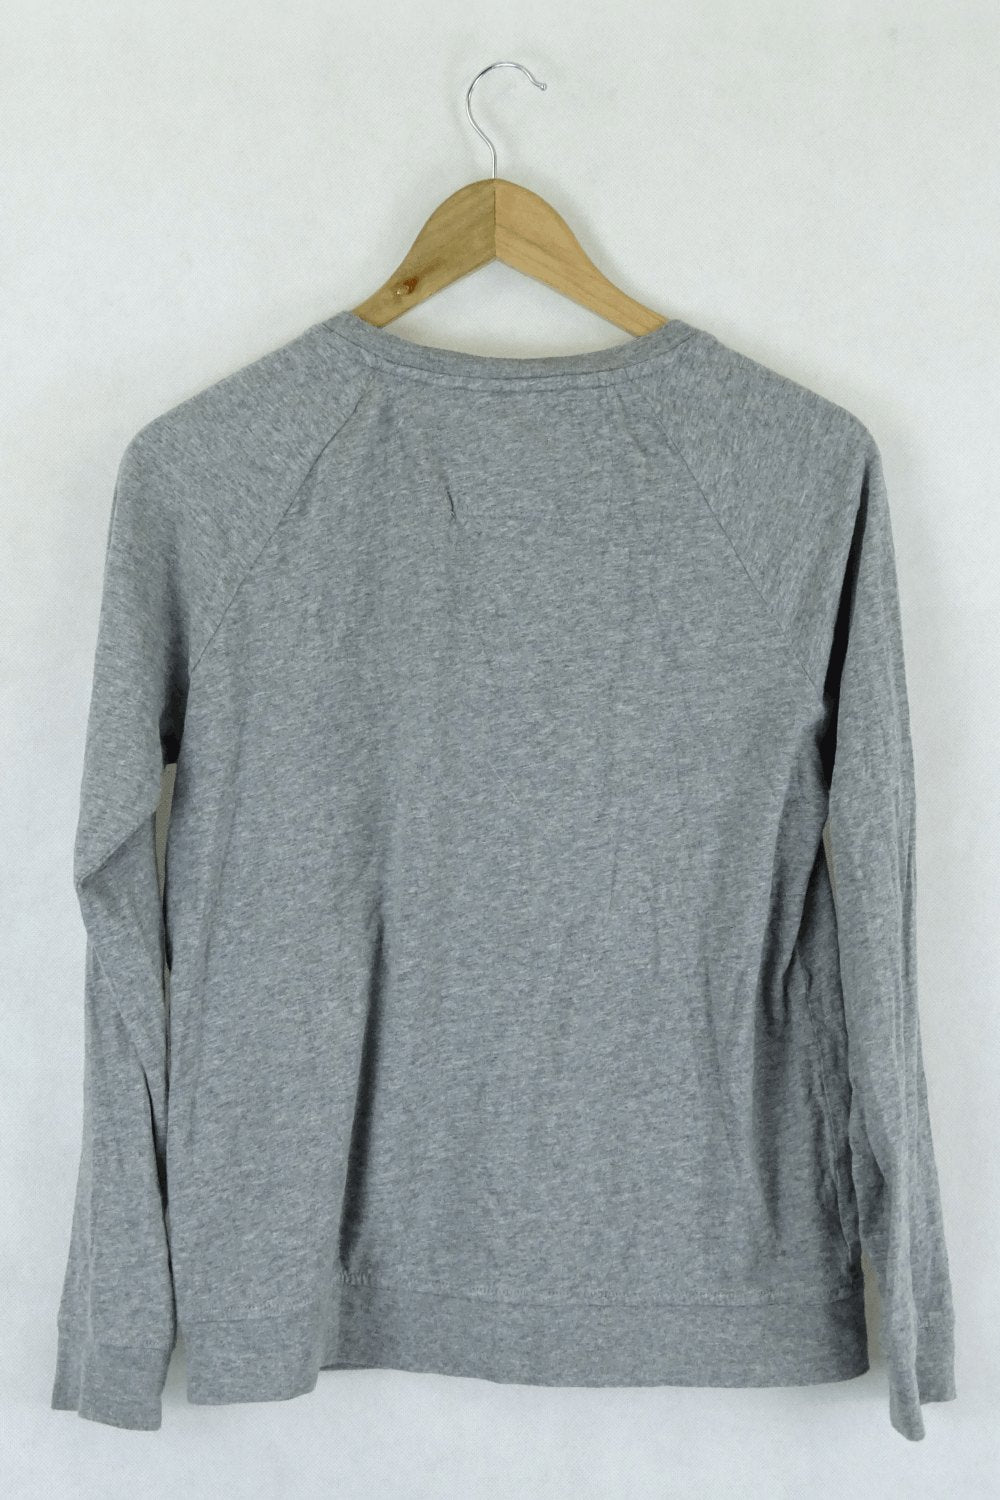 Country road grey jumper XS